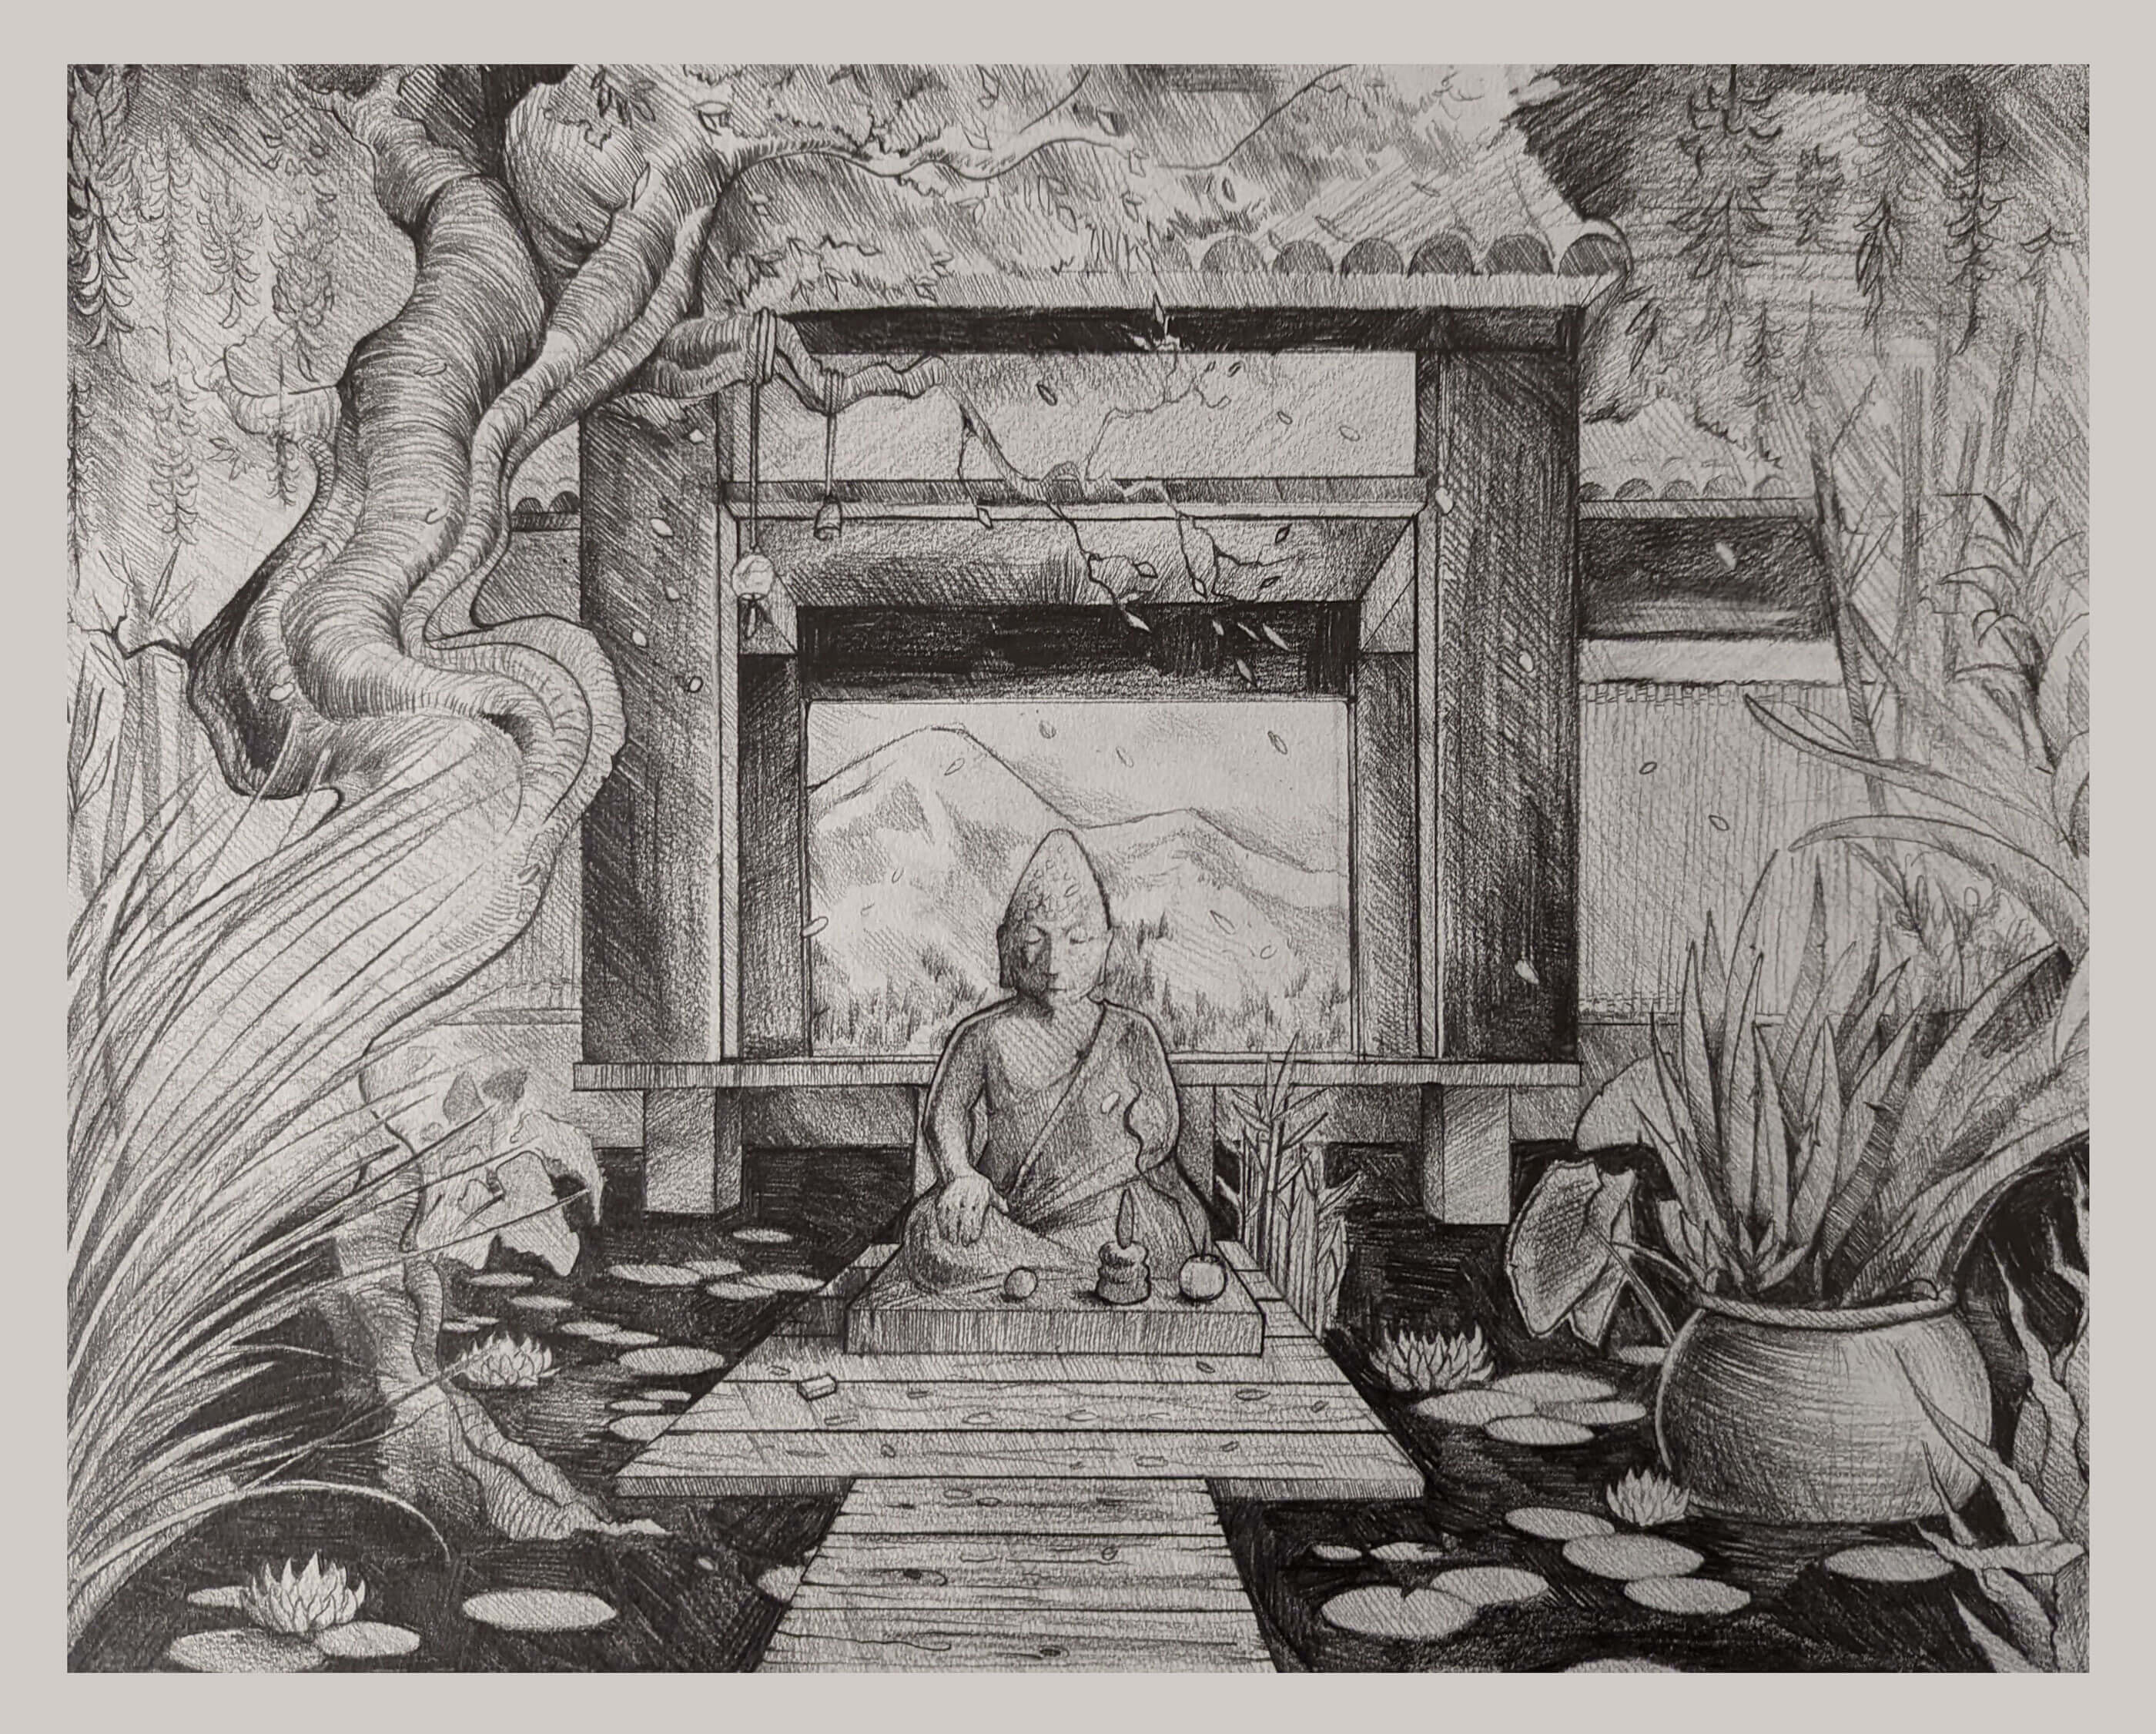 Sketch of a man meditating in a picturesque garden.